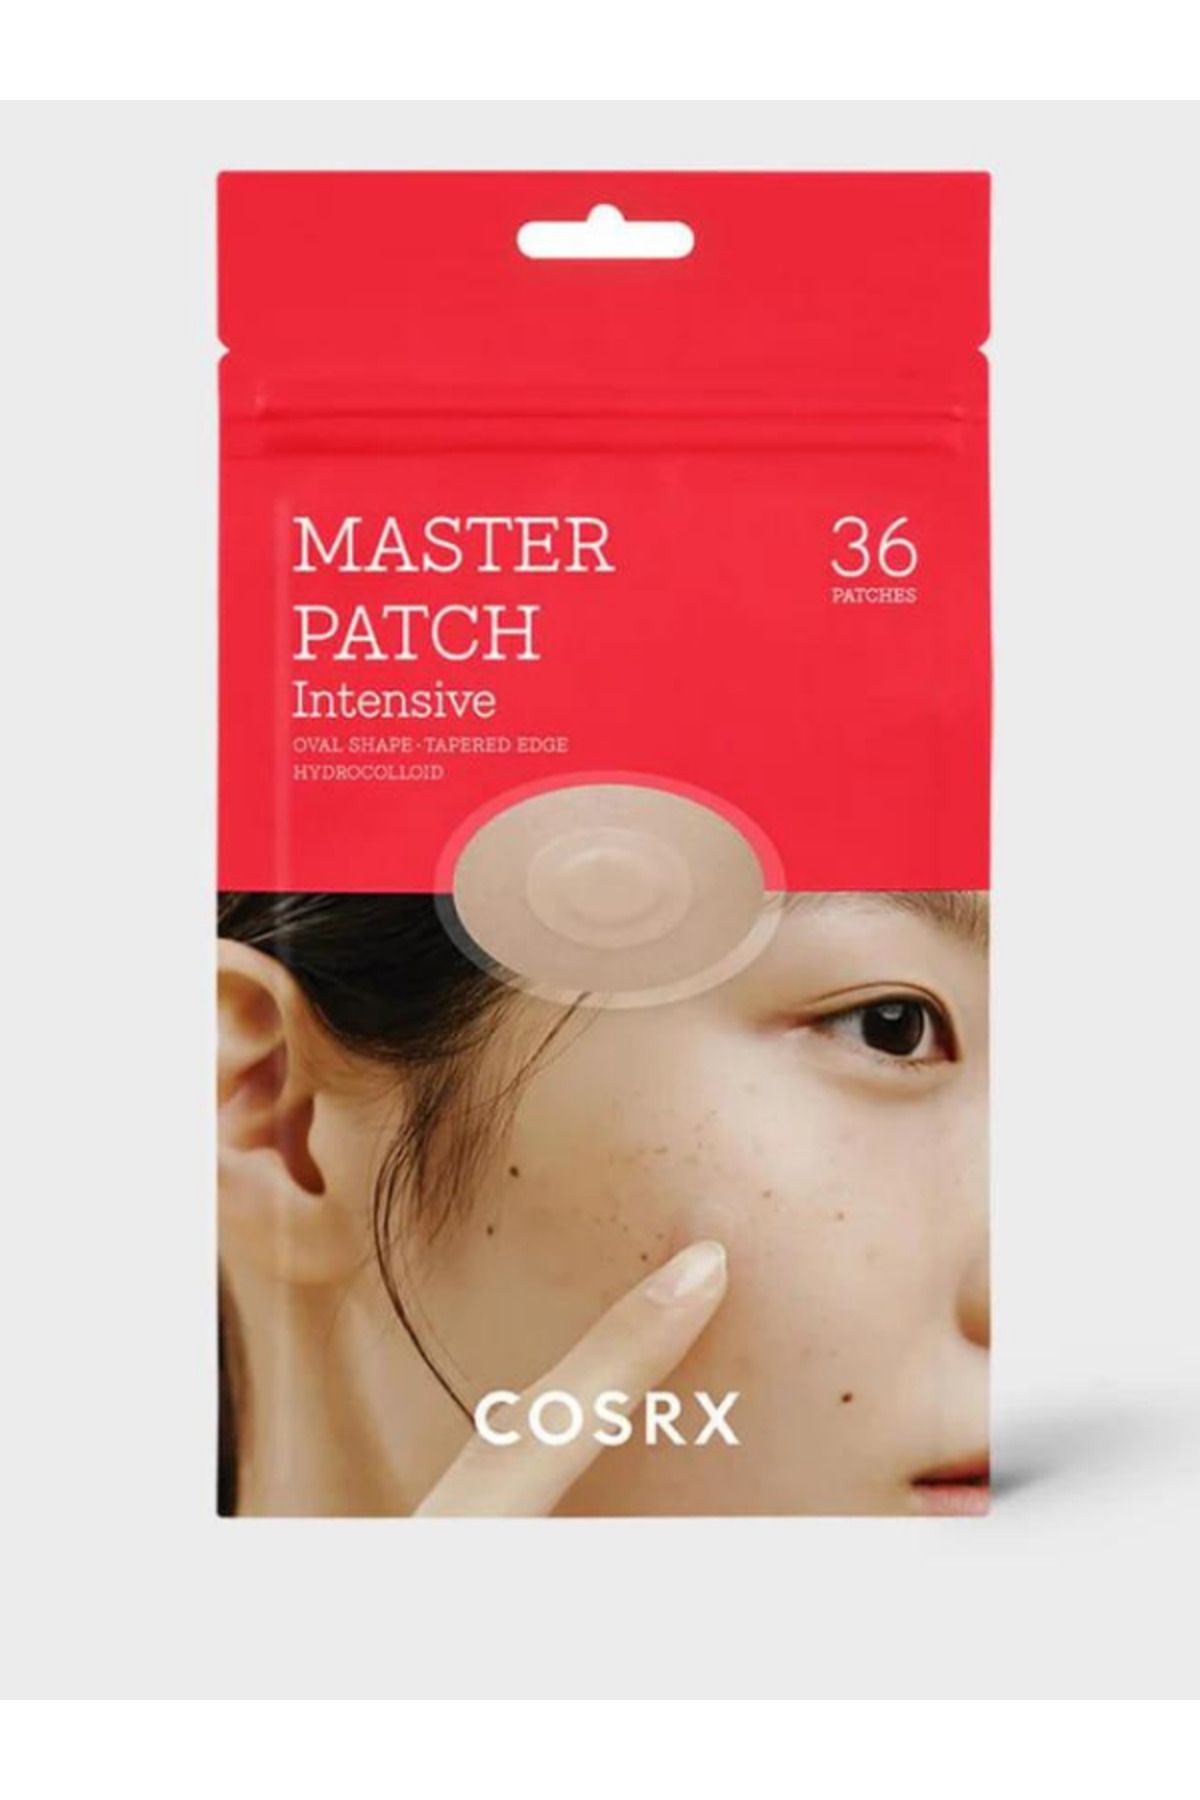 Cosrx MASTER PATCH INTENSIVE